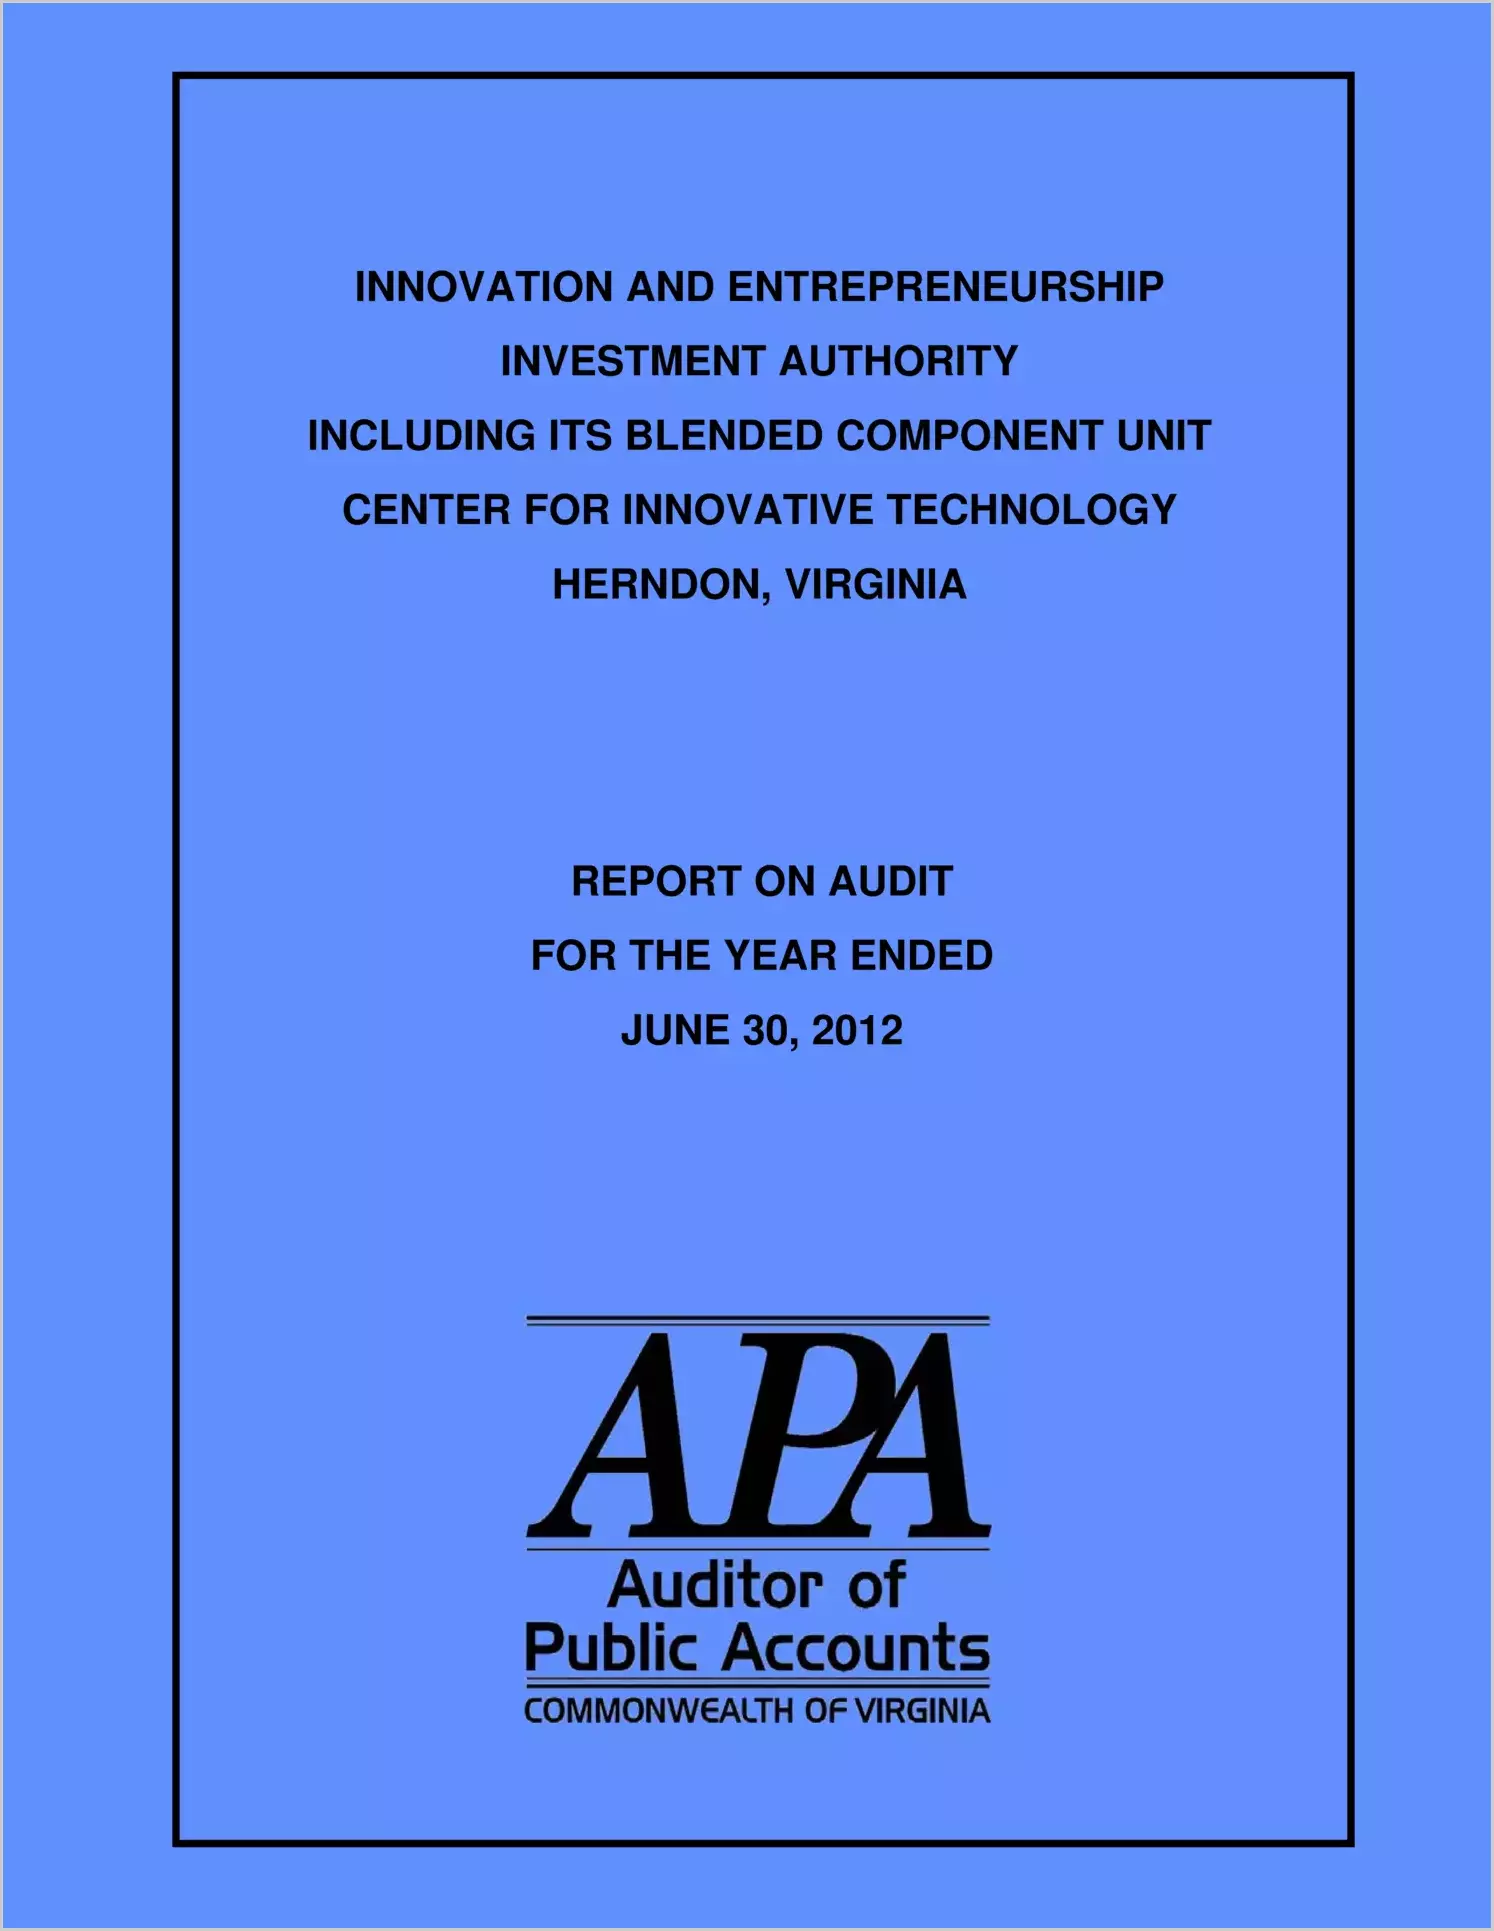 Innovation and Entrepreneurship Investment Authority Including Its Blended Component Unit Center for Innovative Technology for the year ended June 30, 2012